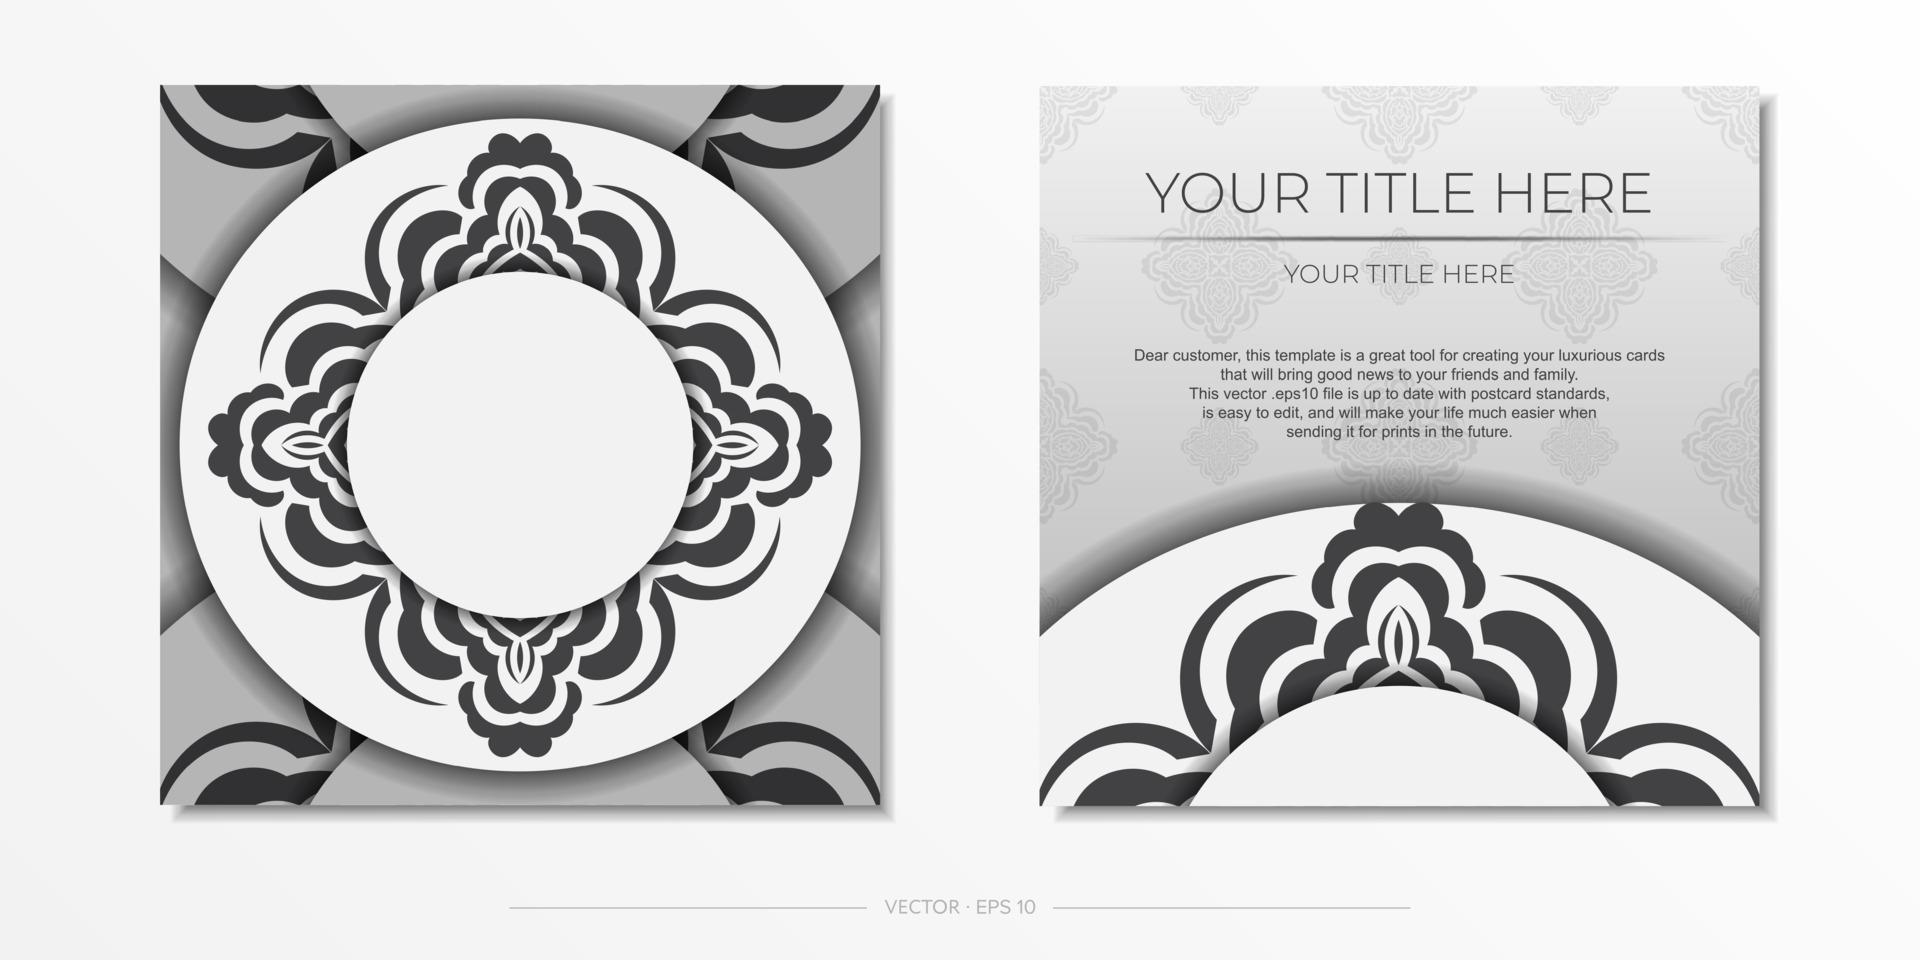 Luxurious Postcard Template White colors with Indian ornaments. Print-ready invitation design with mandala patterns. vector